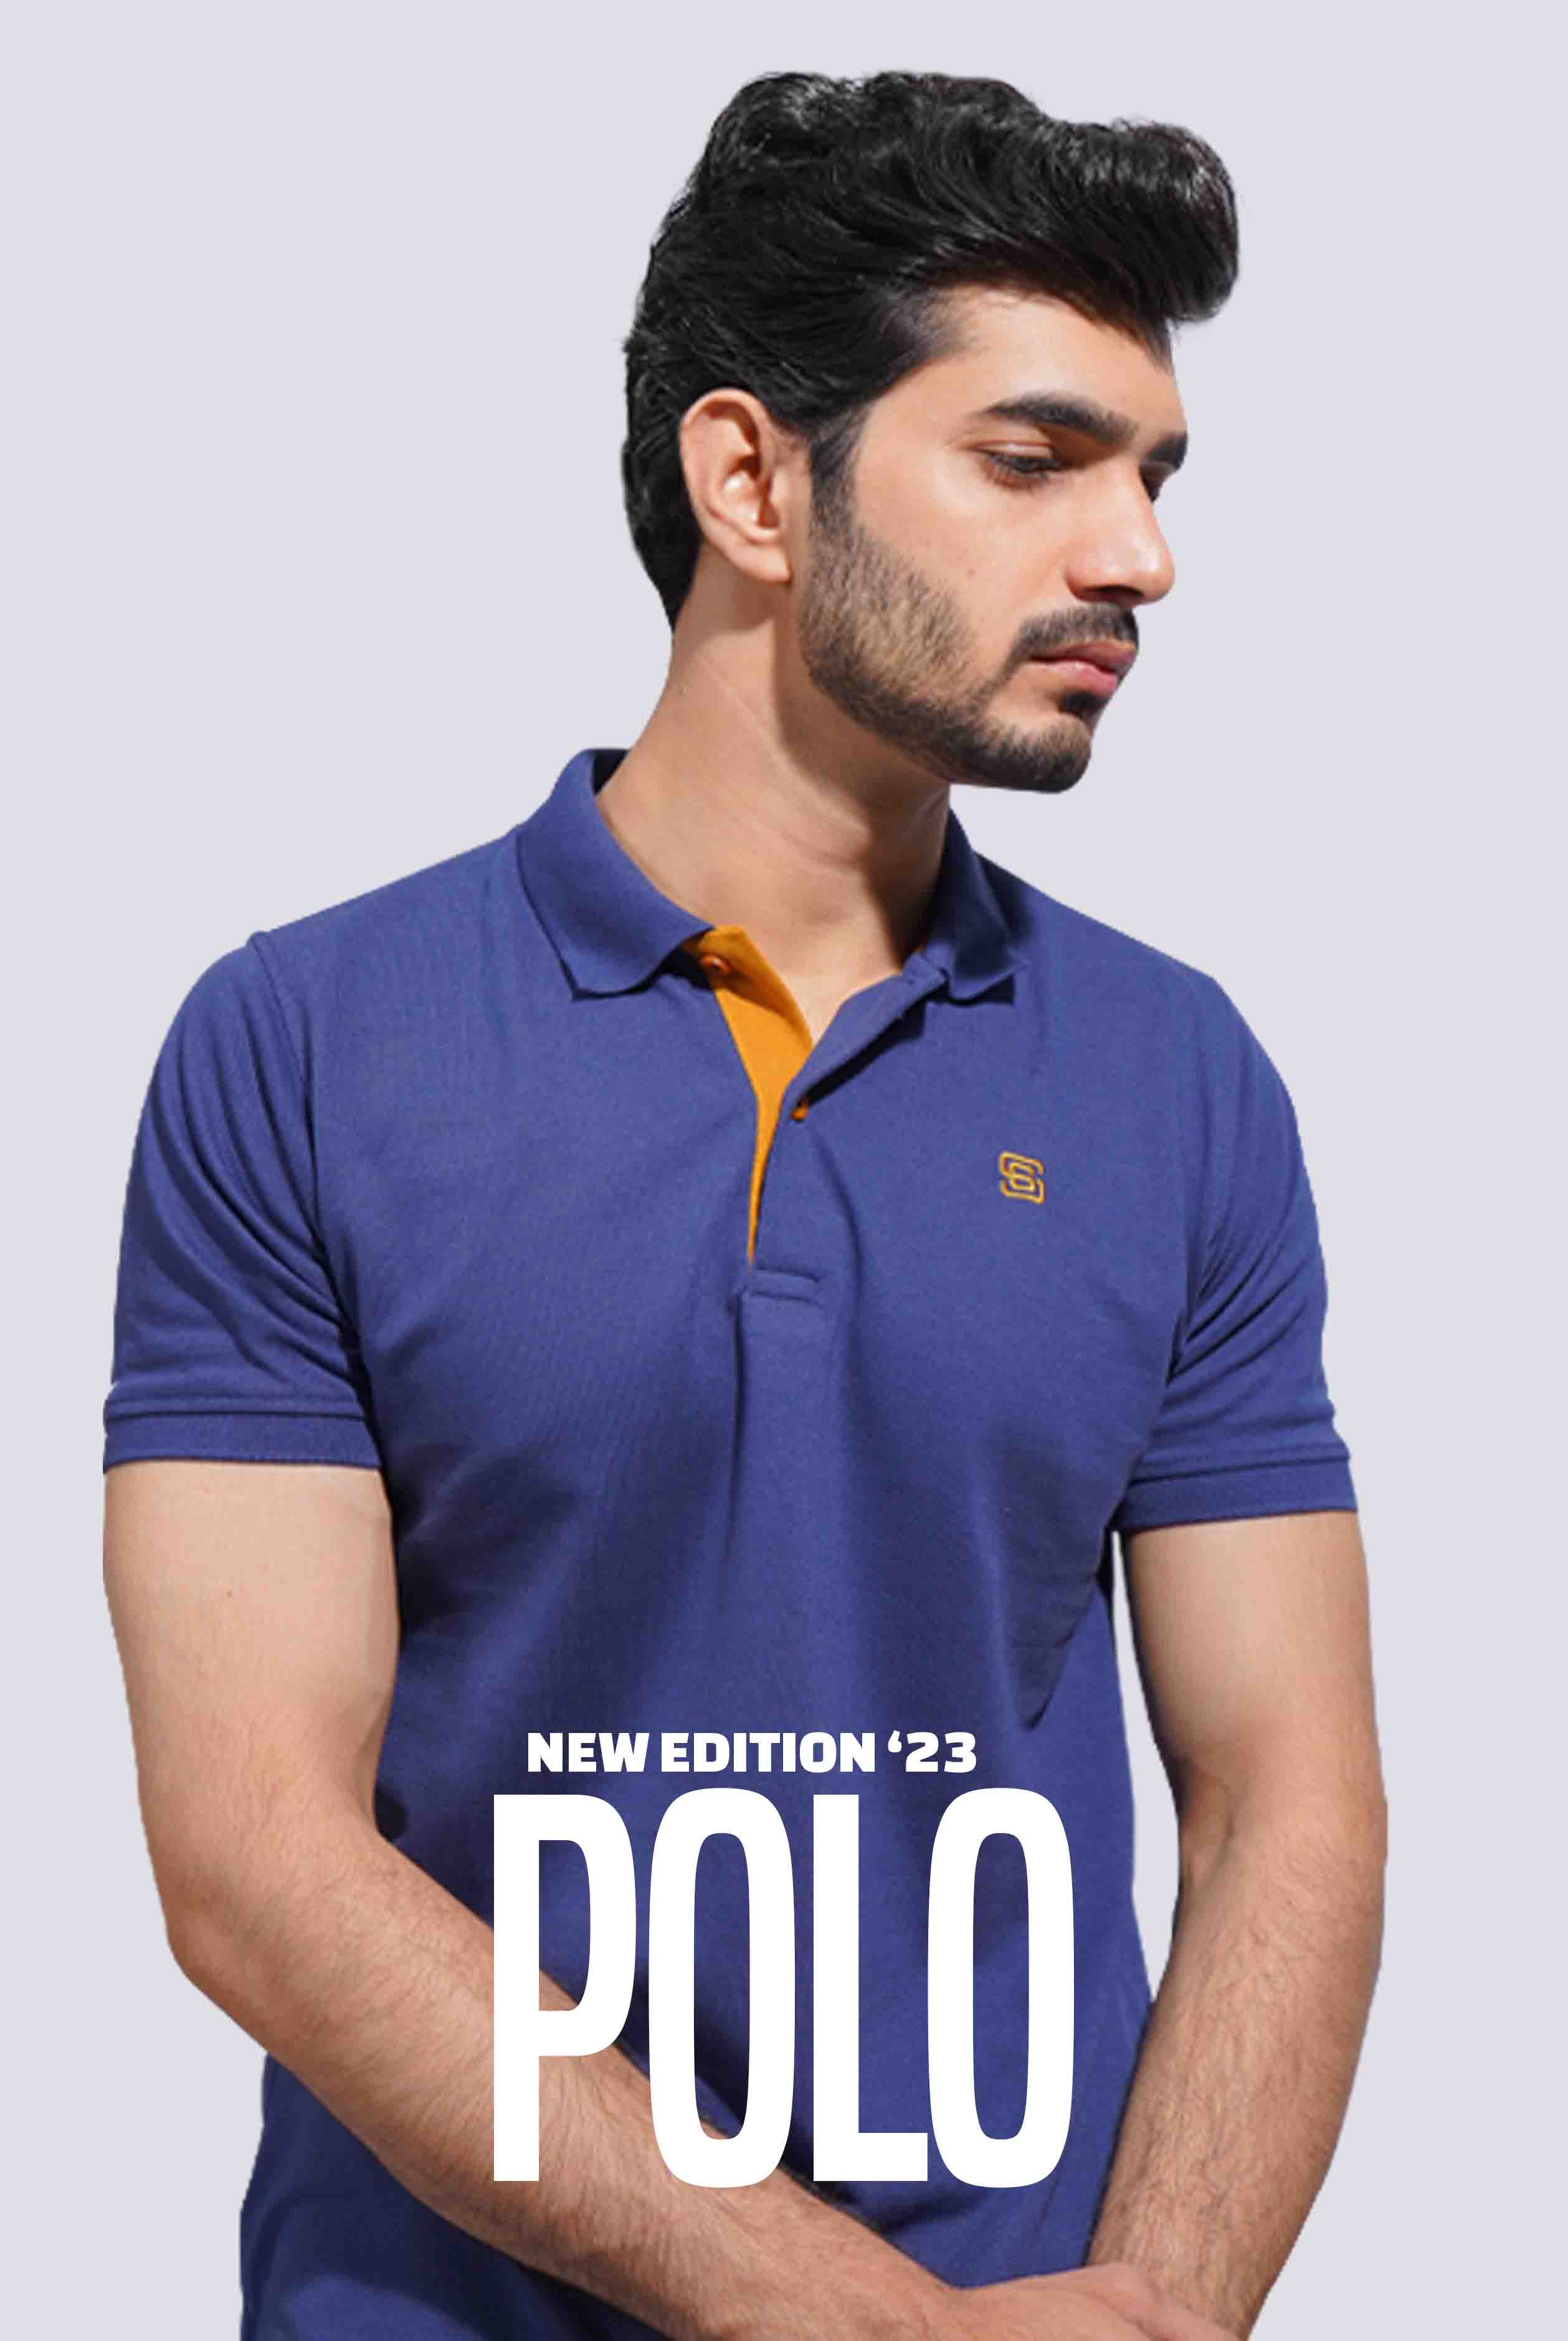 Shahzeb Saeed - Best Men's Clothing Store in Pakistan